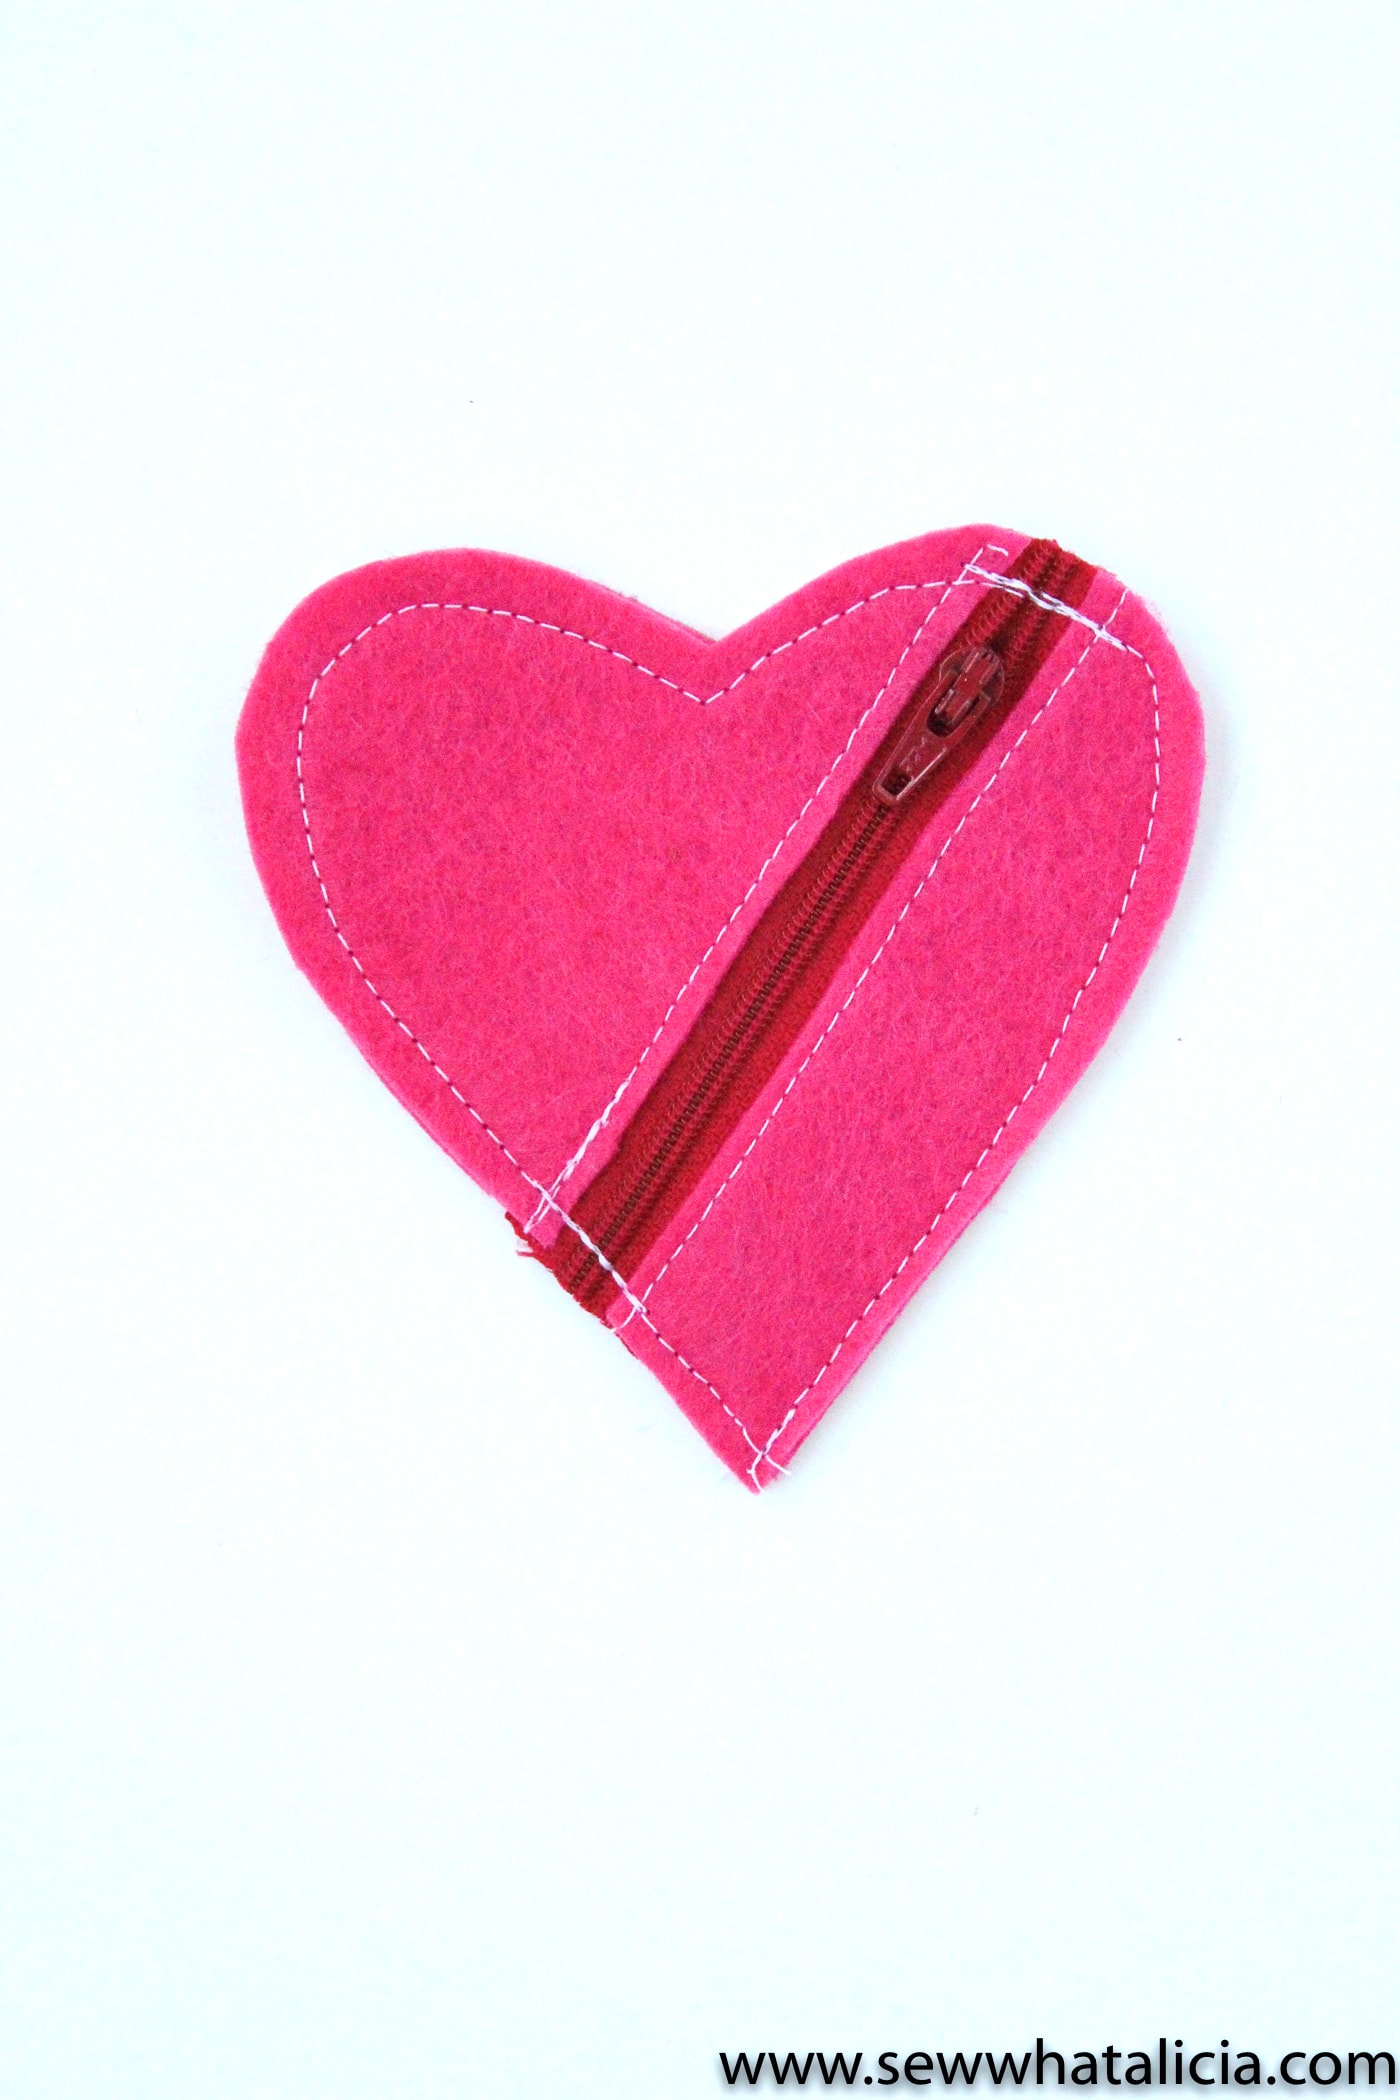 Felt Heart DIY Earbud Pouch - a free tutorial, makes a cute easy to make Valentine's Day gift. #earbudpouch #DIYearbudpouch #valentinesdaycrafts #valentinesdaygifts #diyvalentines #sewingproject #sewingpattern